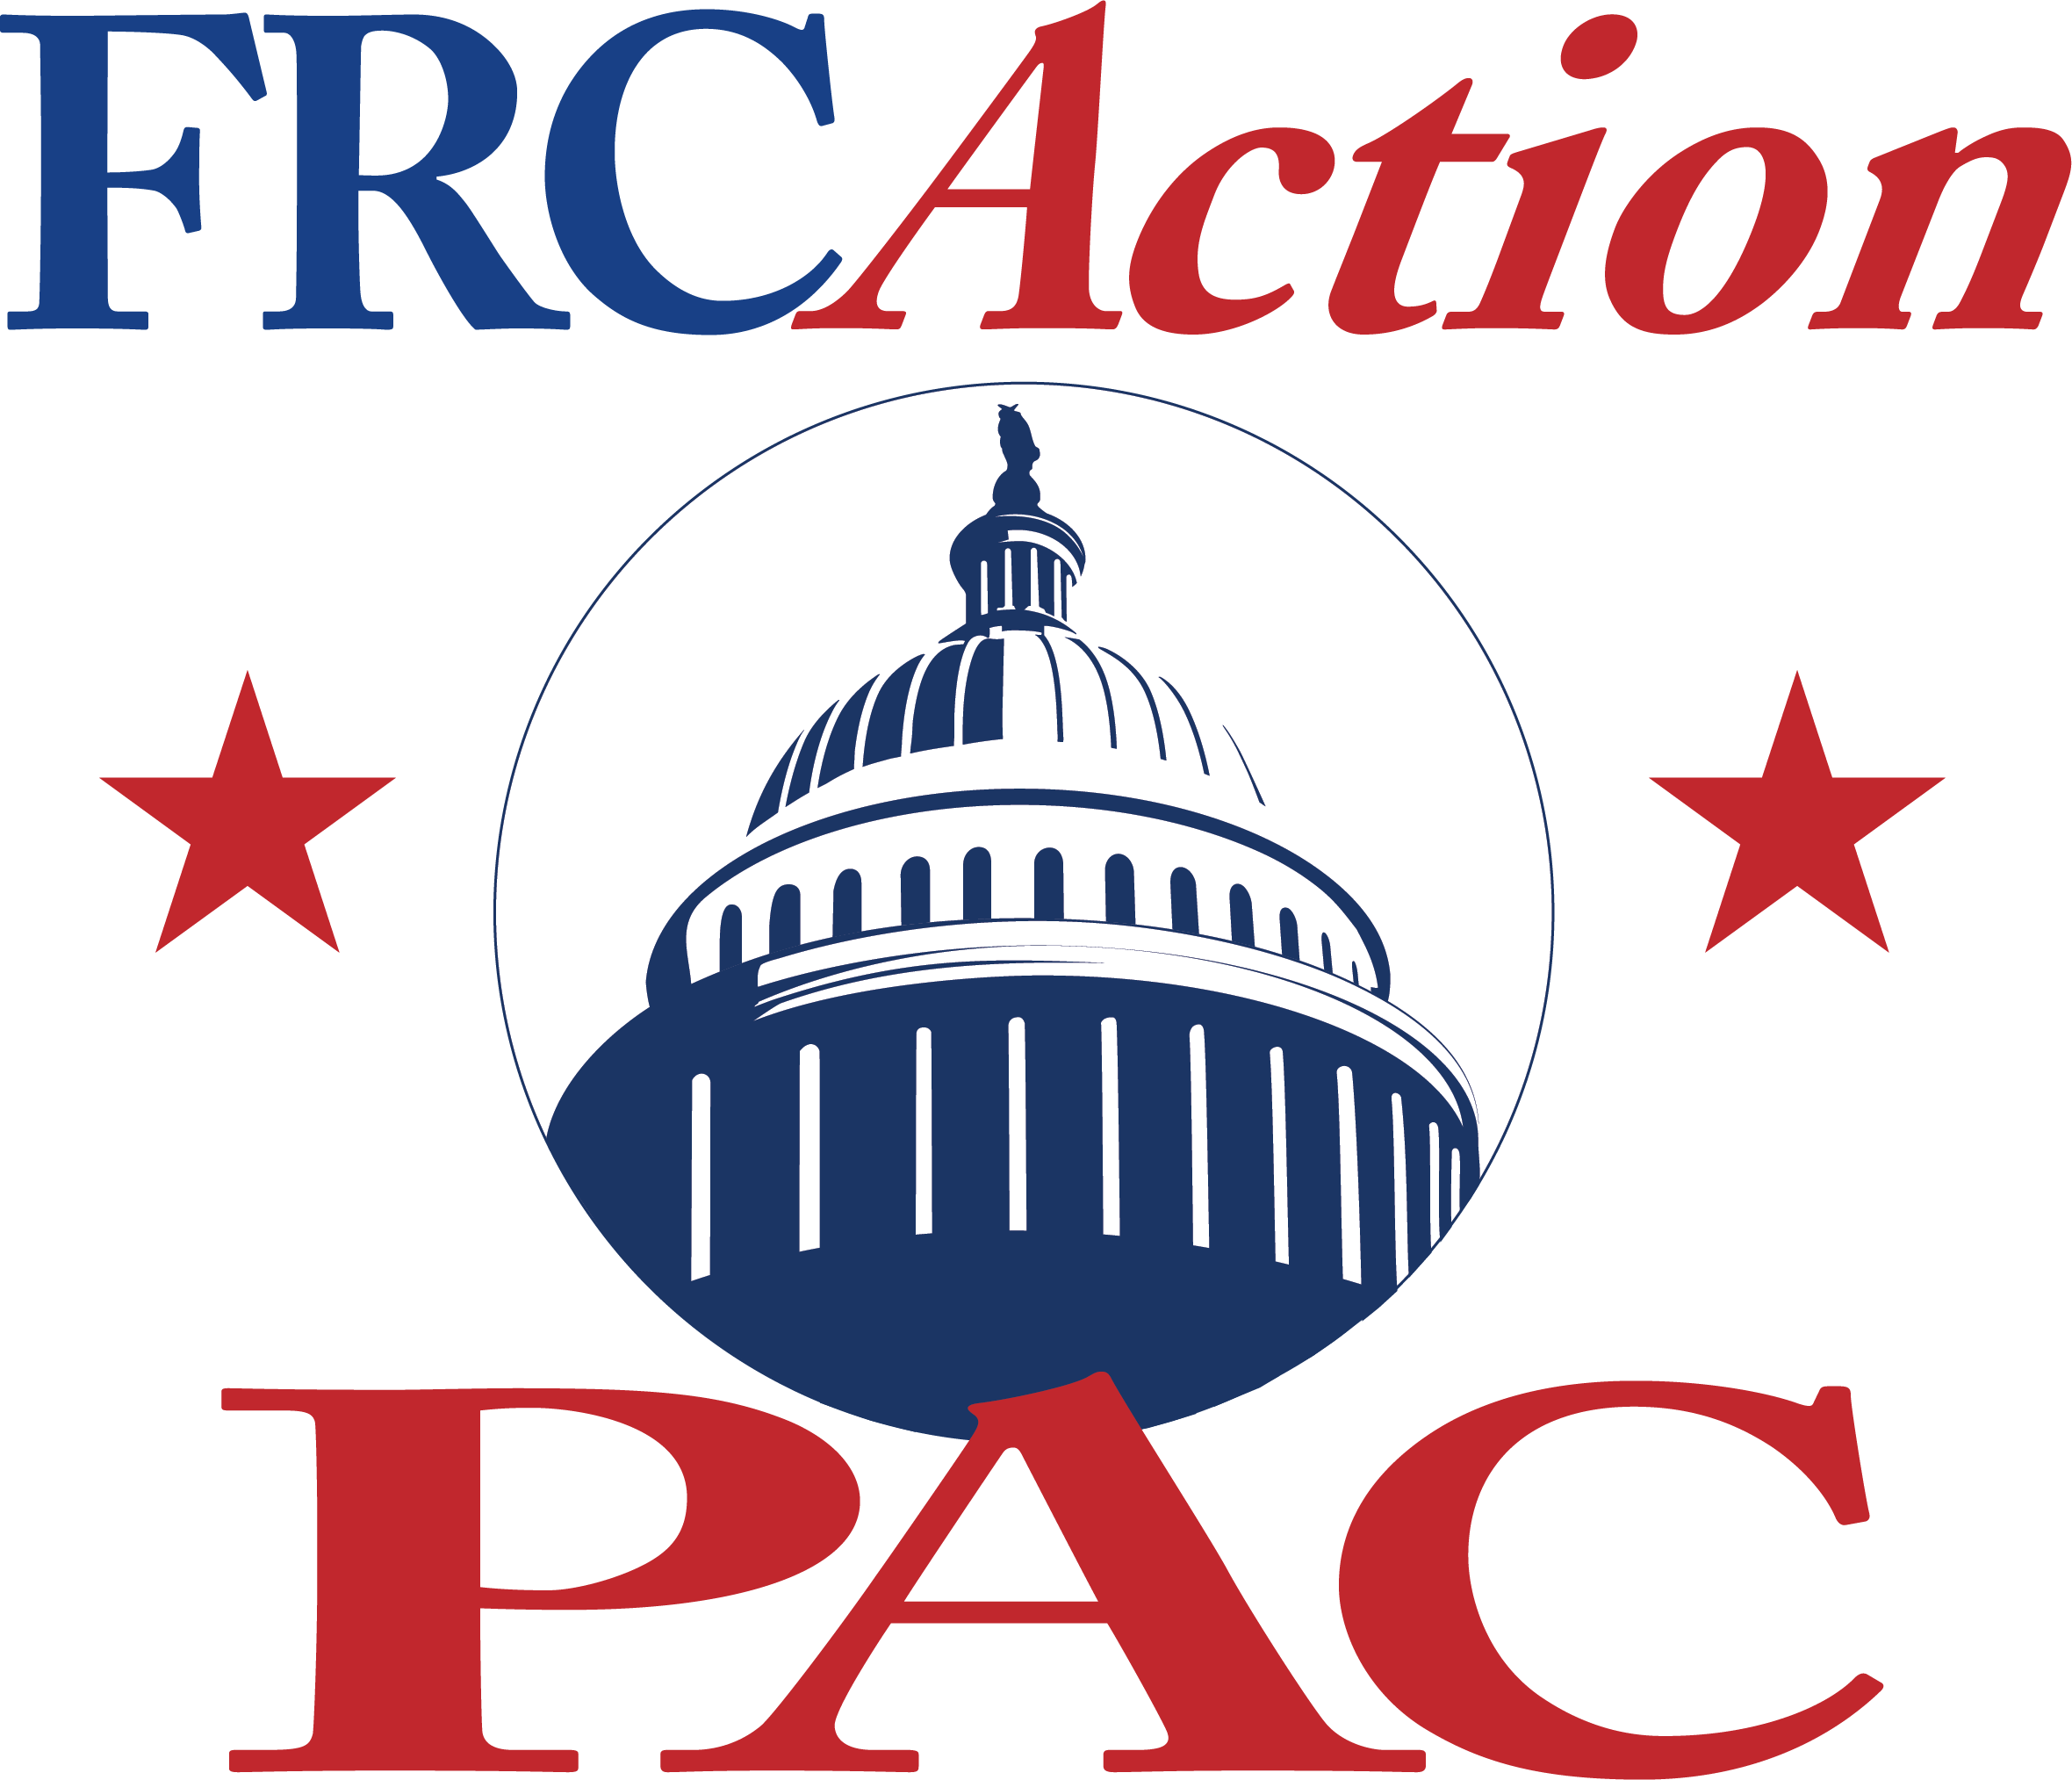 FRC Action PAC Endorses James Lankford as Dedicated Pro-Family Defender